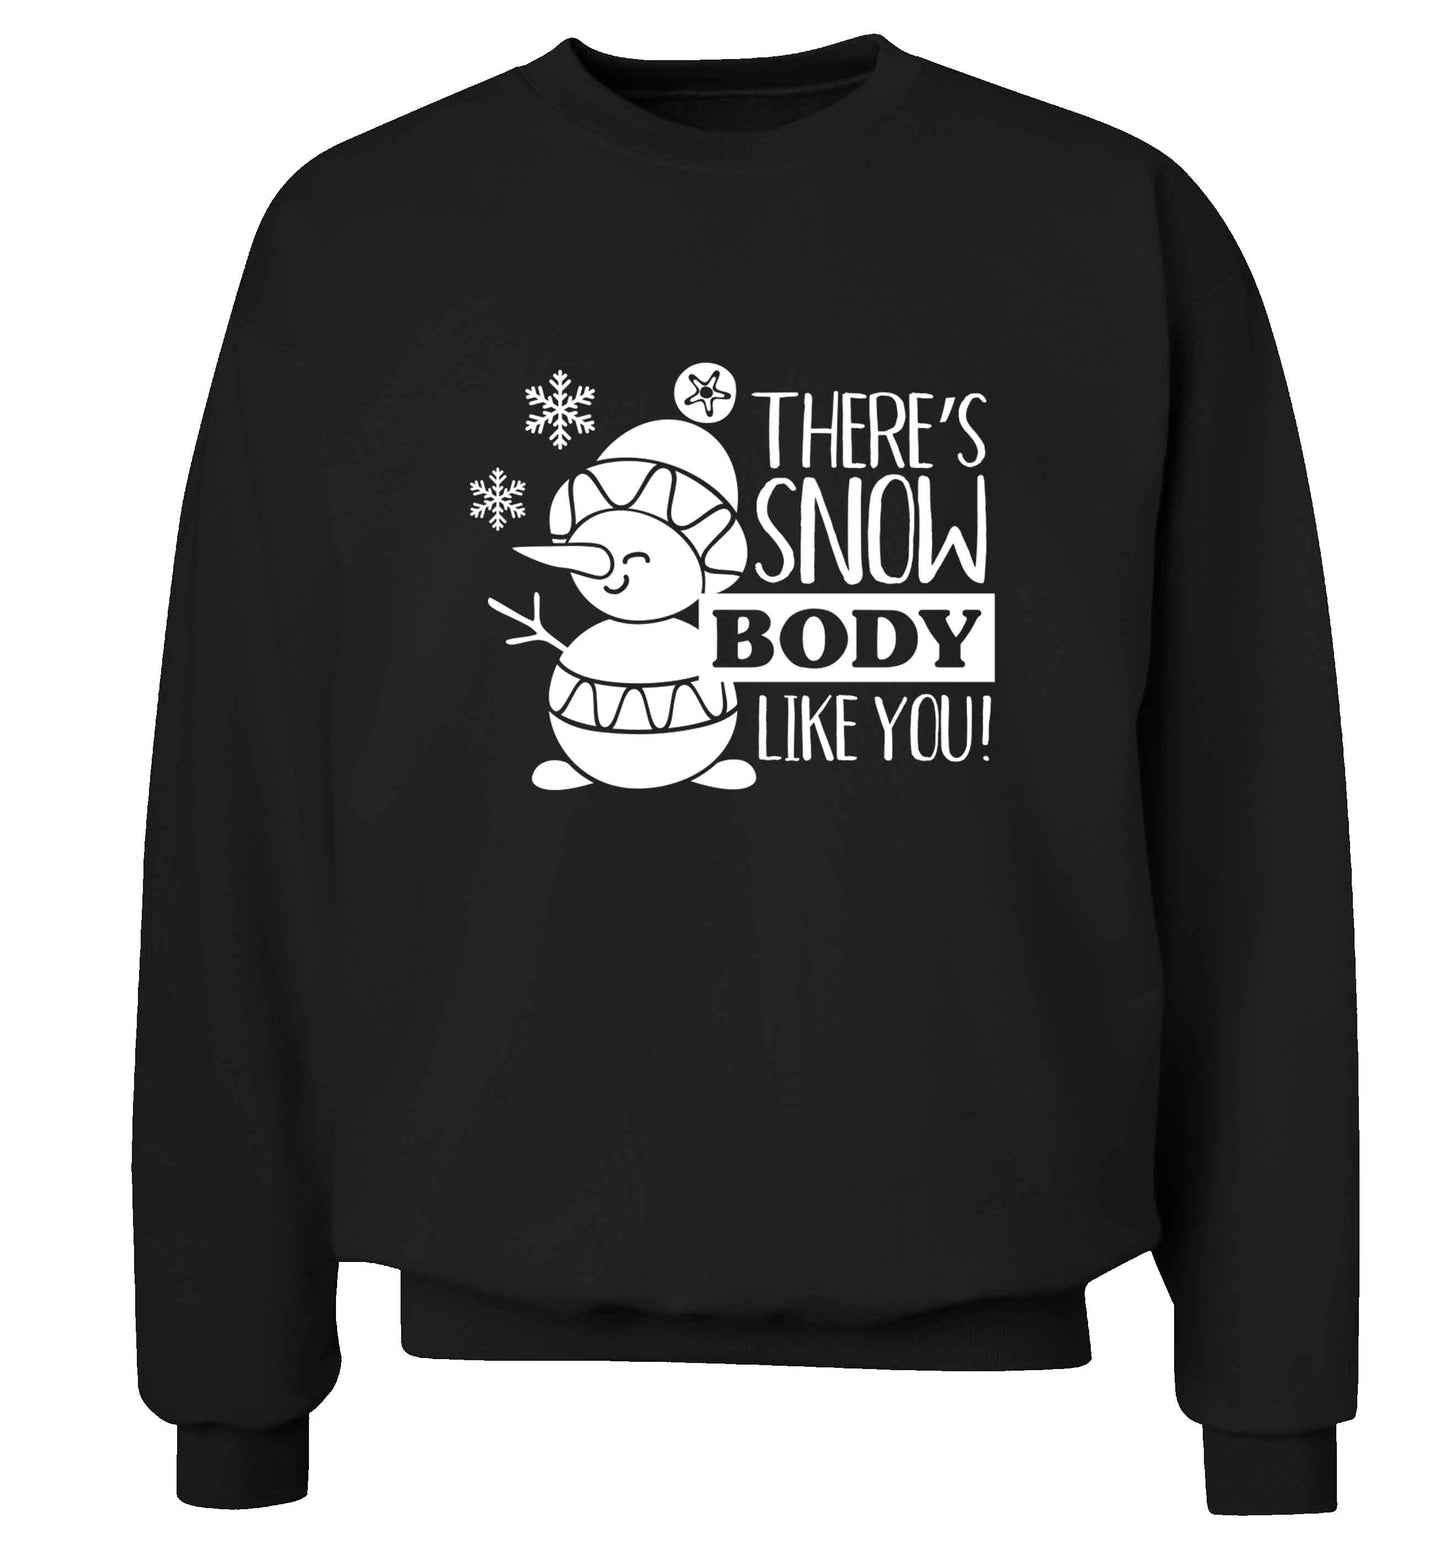 There's snow body like you adult's unisex black sweater 2XL